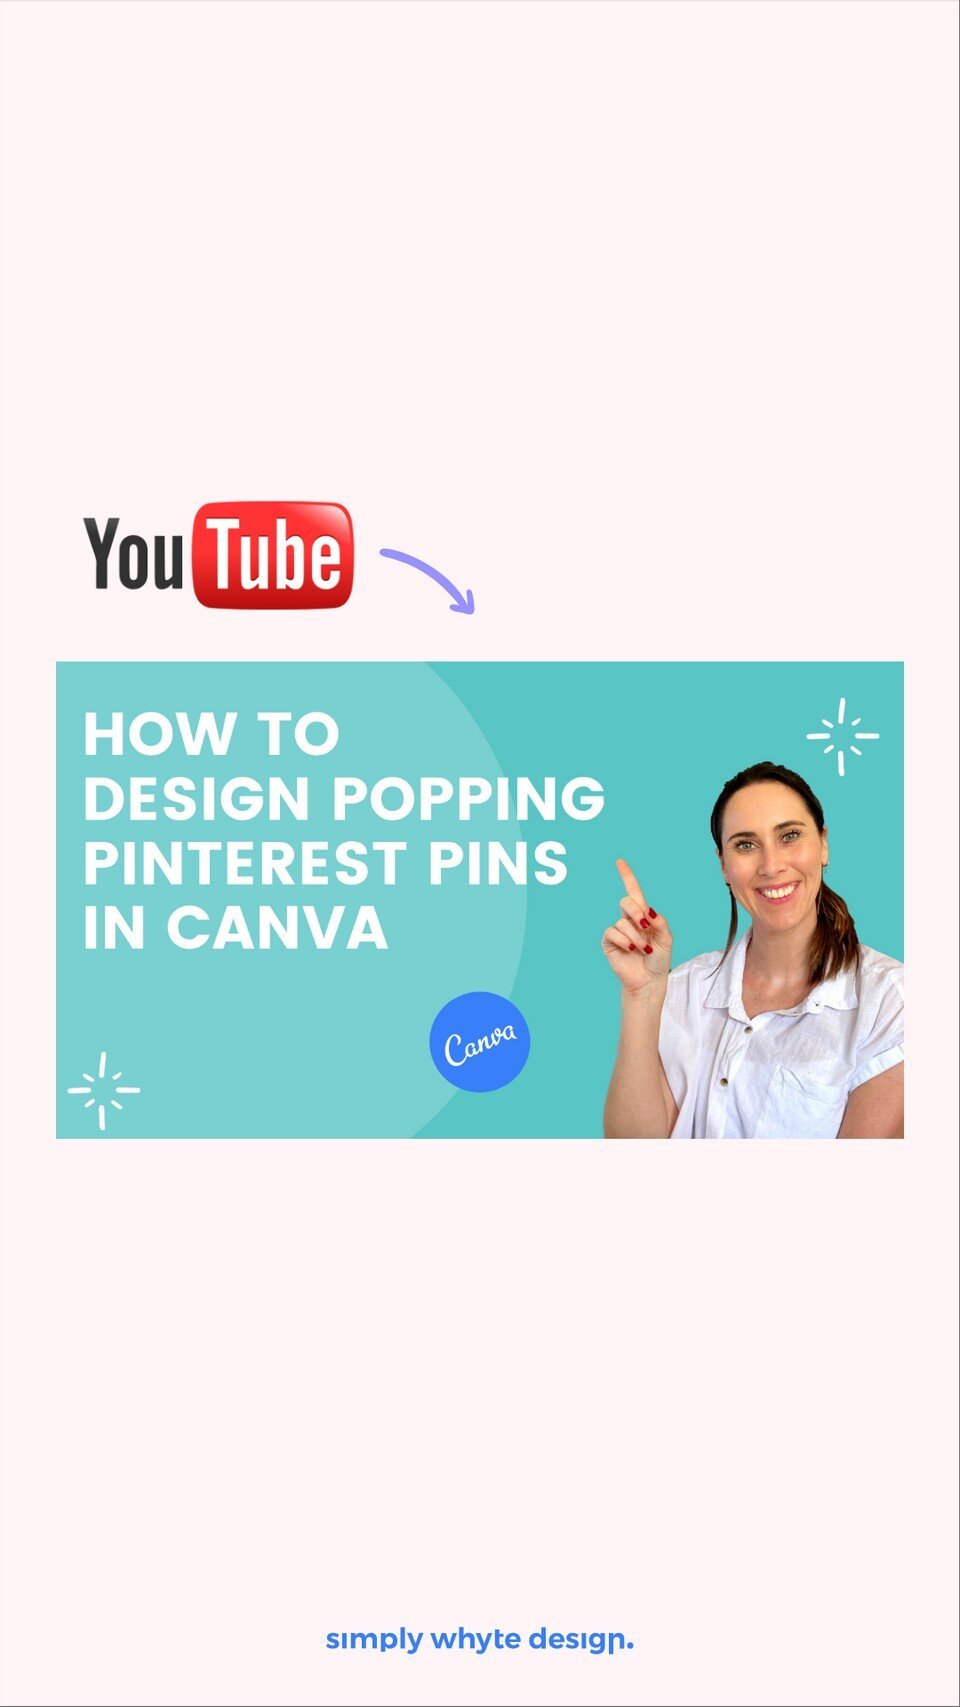 how to design popping pins on canva